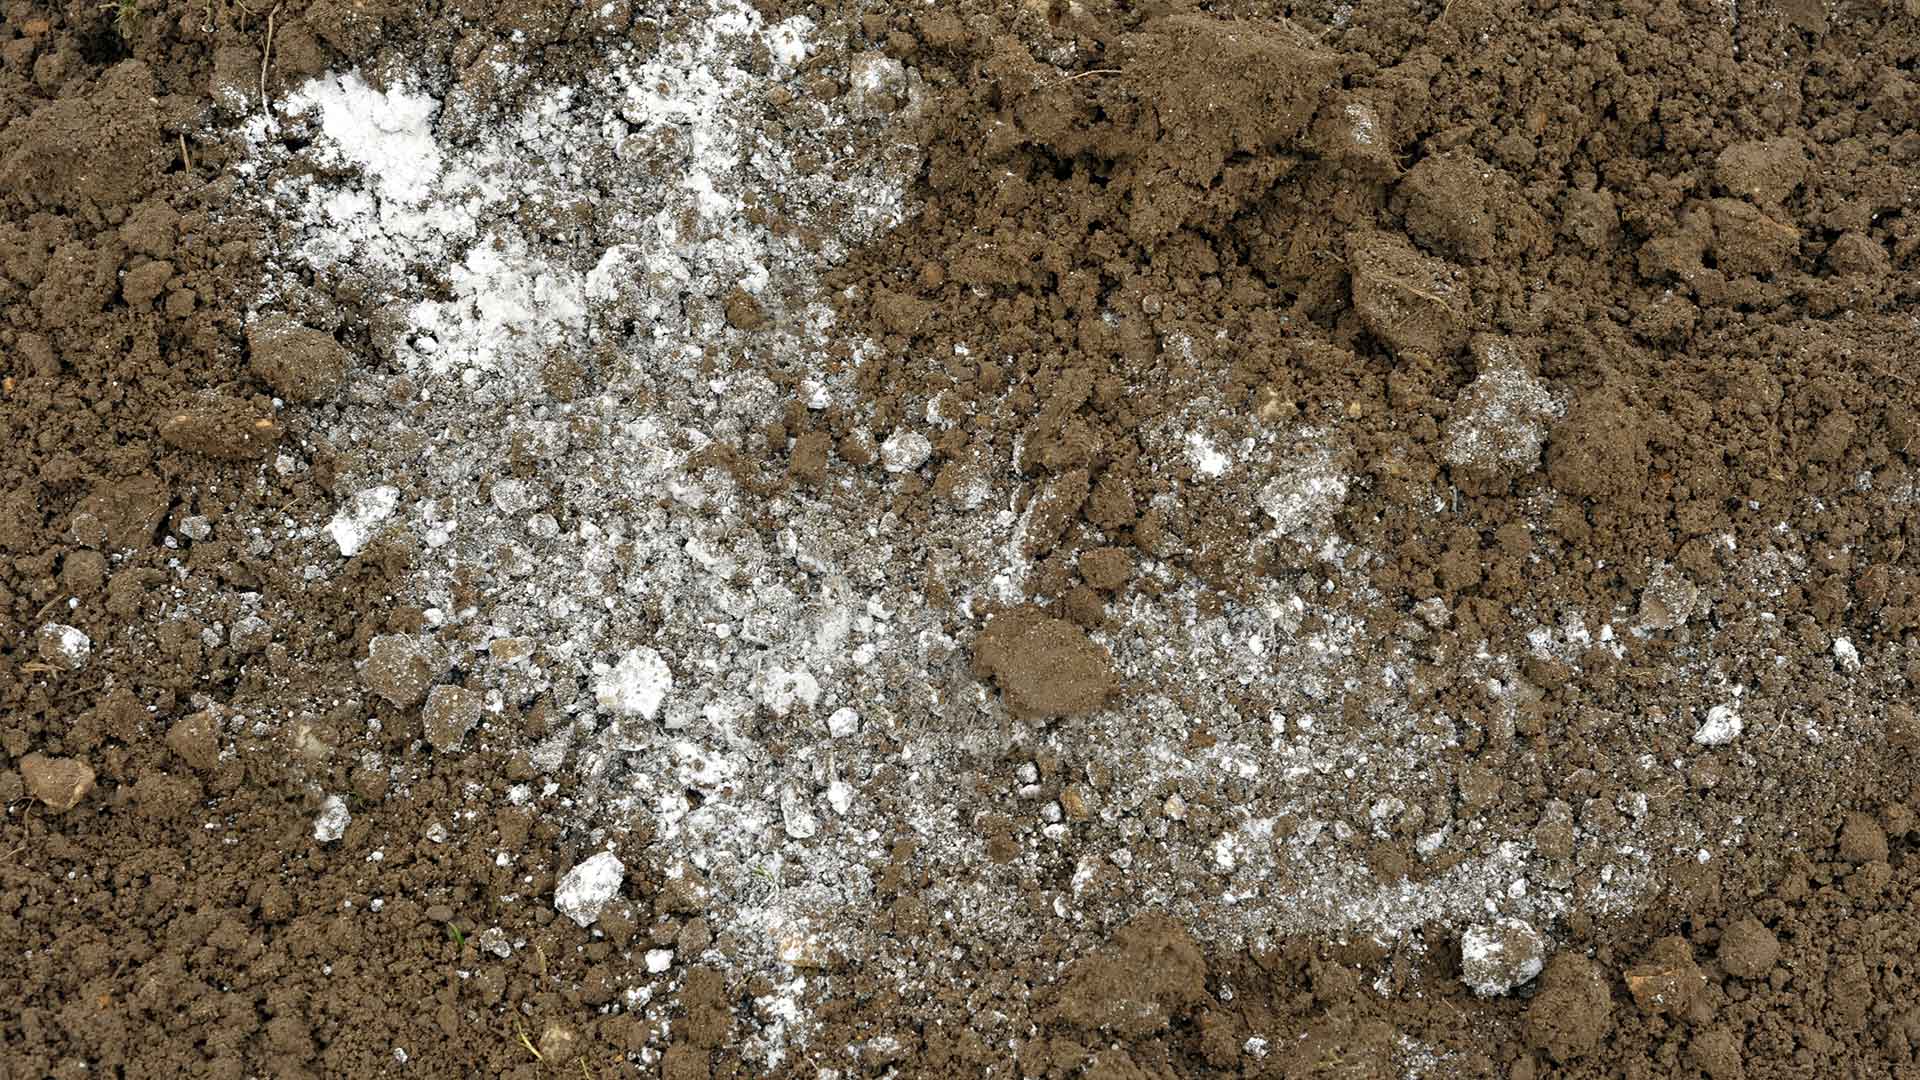 Lime spread upon soil on a property in Carlisle, IA. 